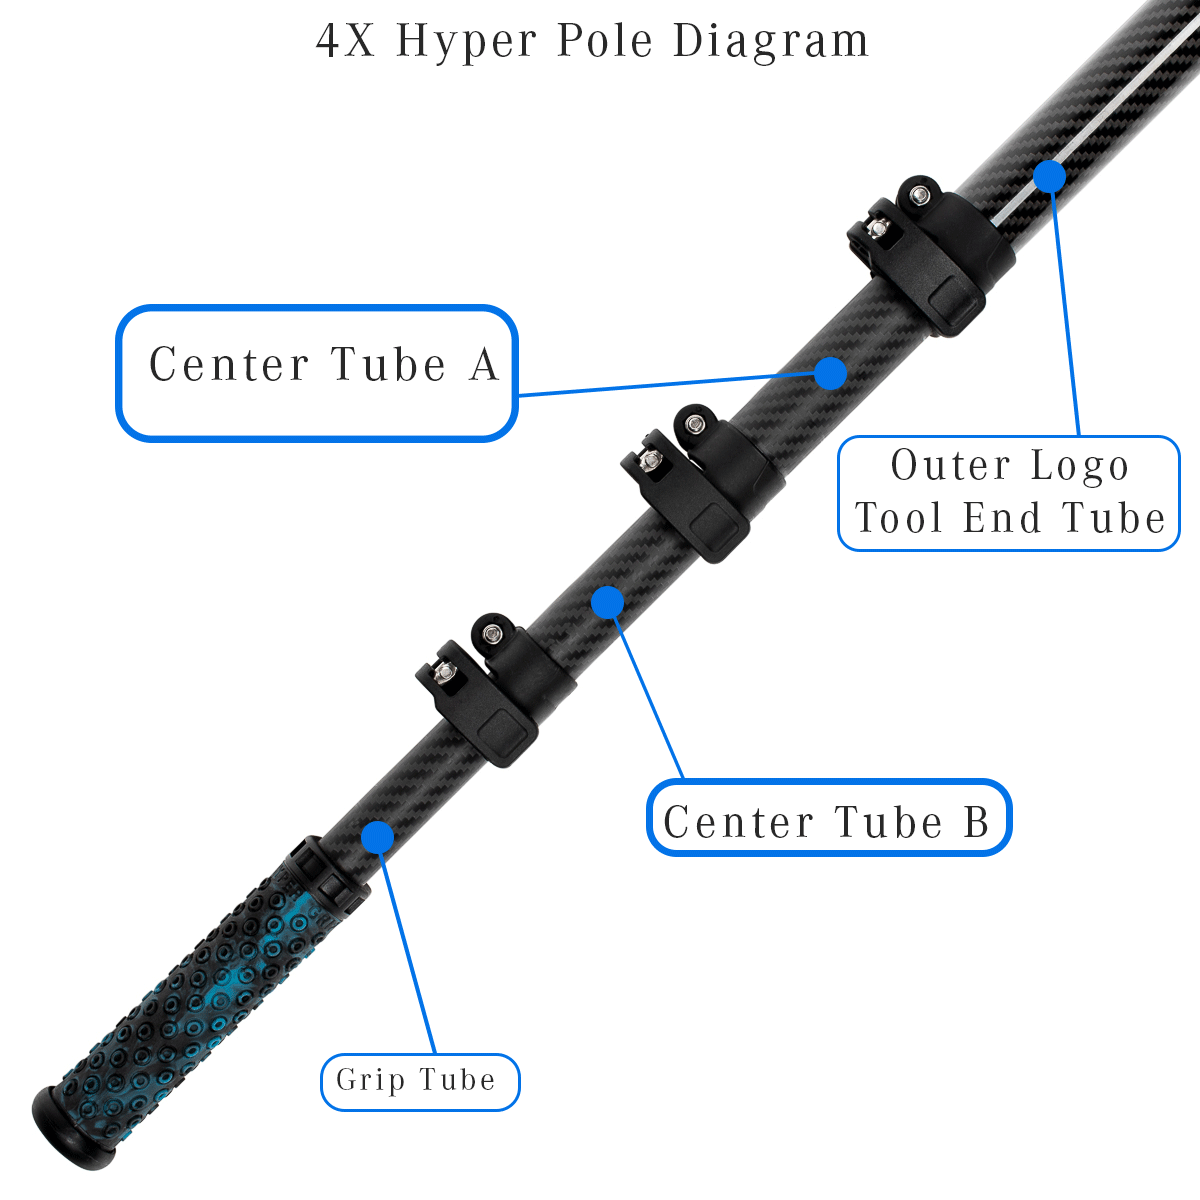 Inner Individual Replacement Tube / Hyper Pole